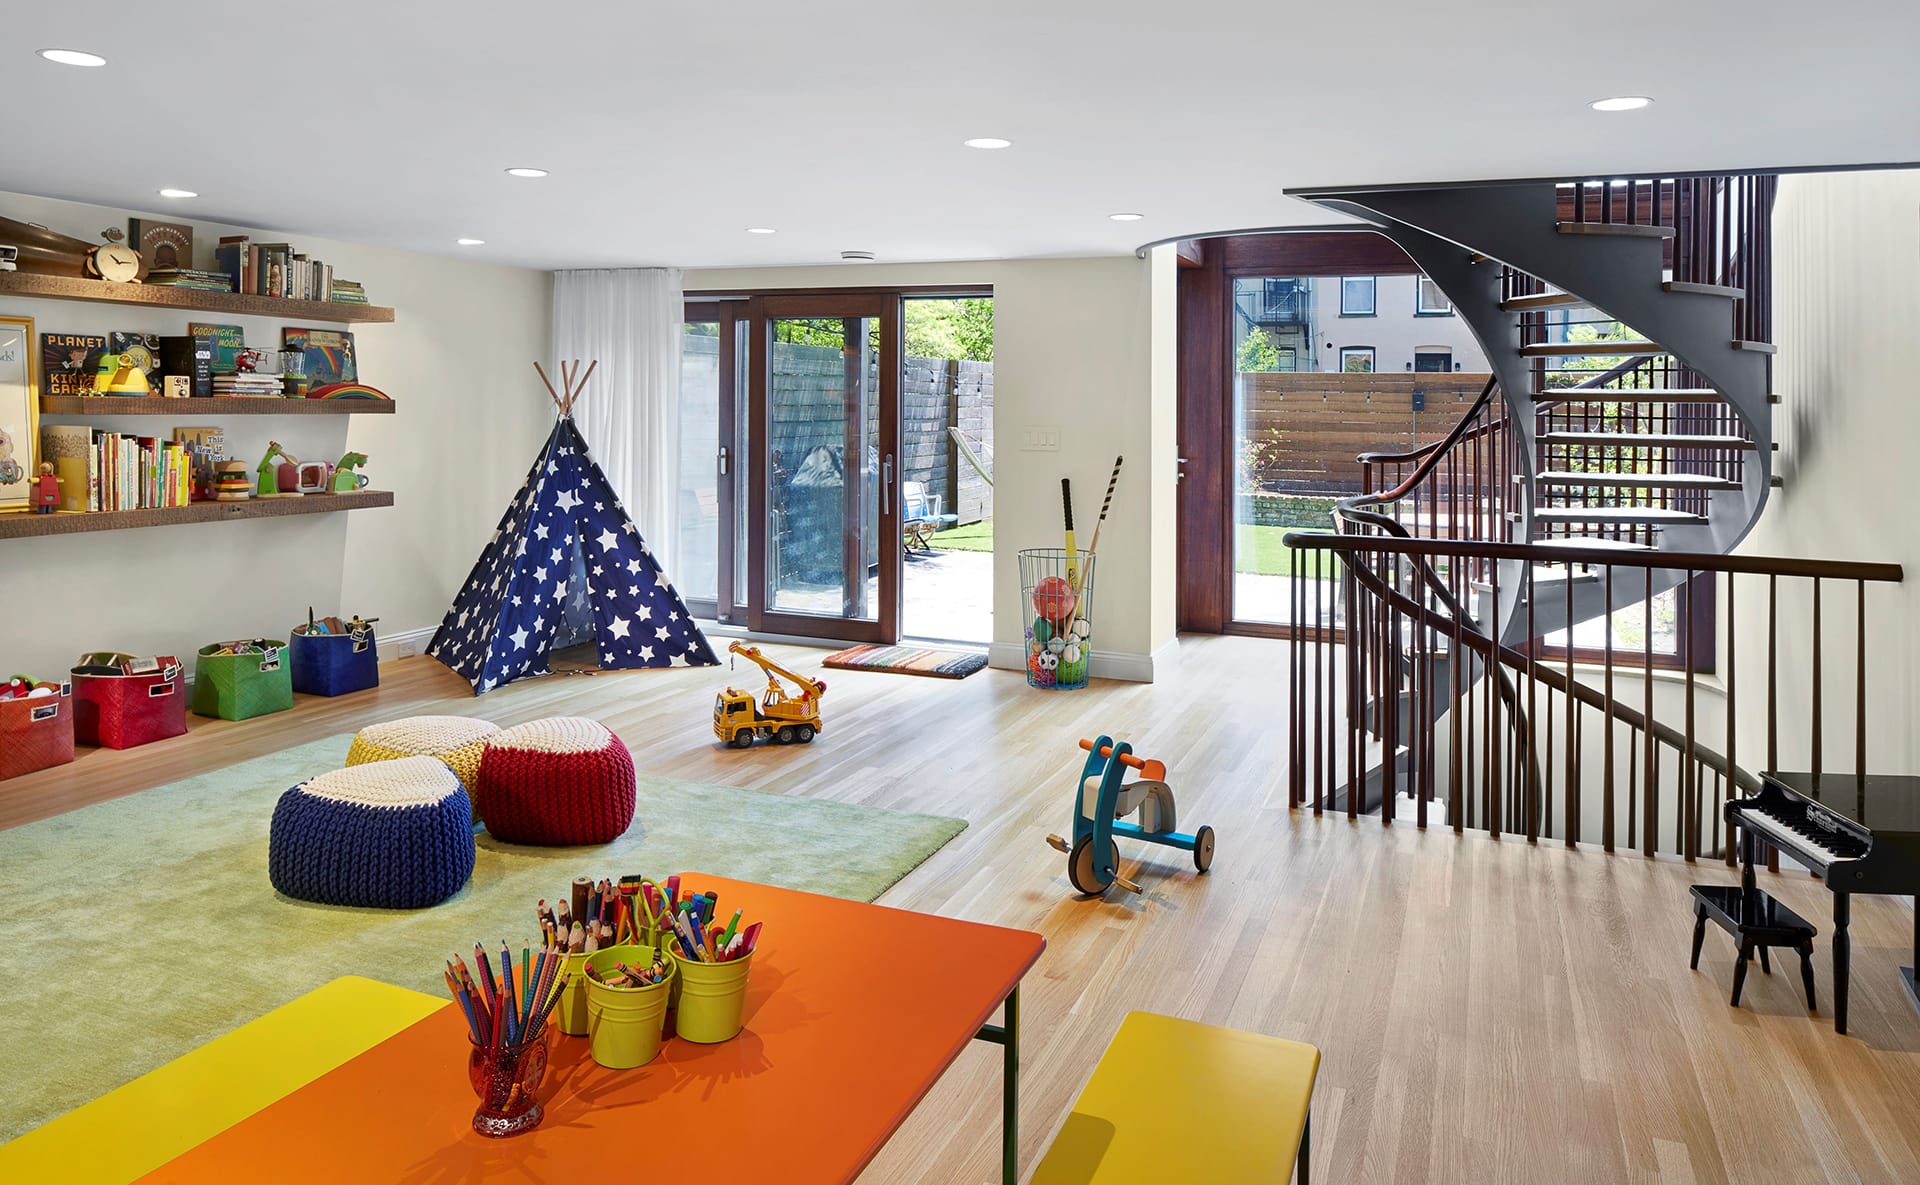 Playroom with a green carpet, orange and yellow picnic table, blue star-patterned teepee, open-riser and open stringer sculptural staircase, and dark wood accents. A child-size grand piano sits at the right corner of the frame.